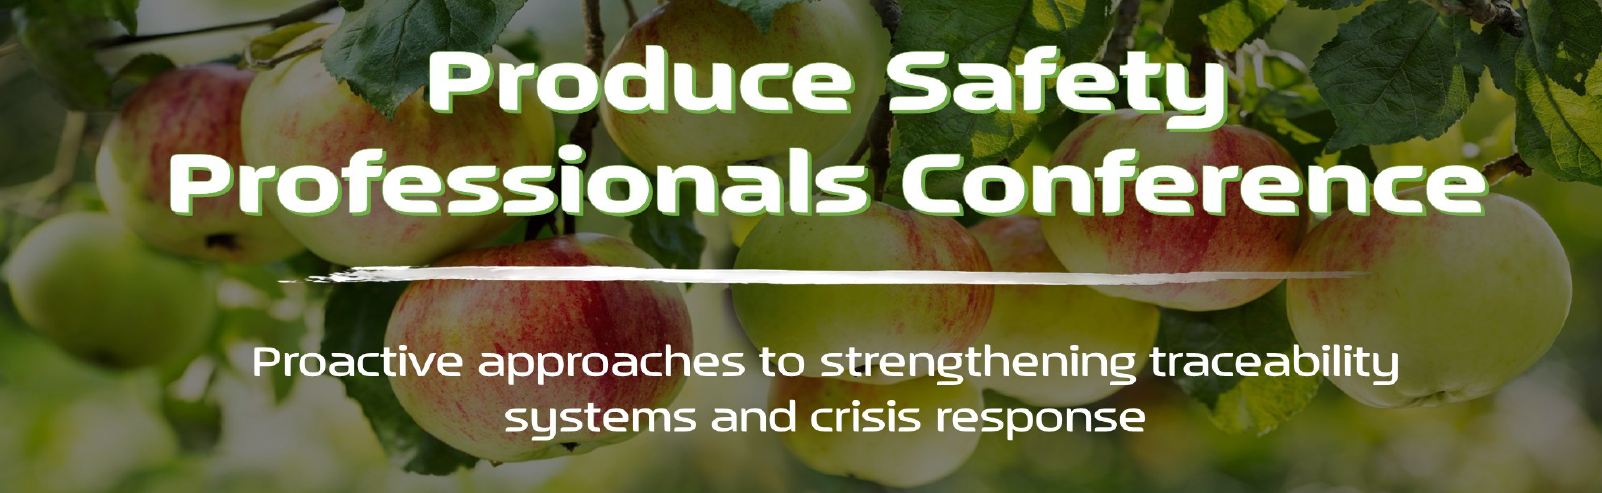 Produce Safety Professionals Conference